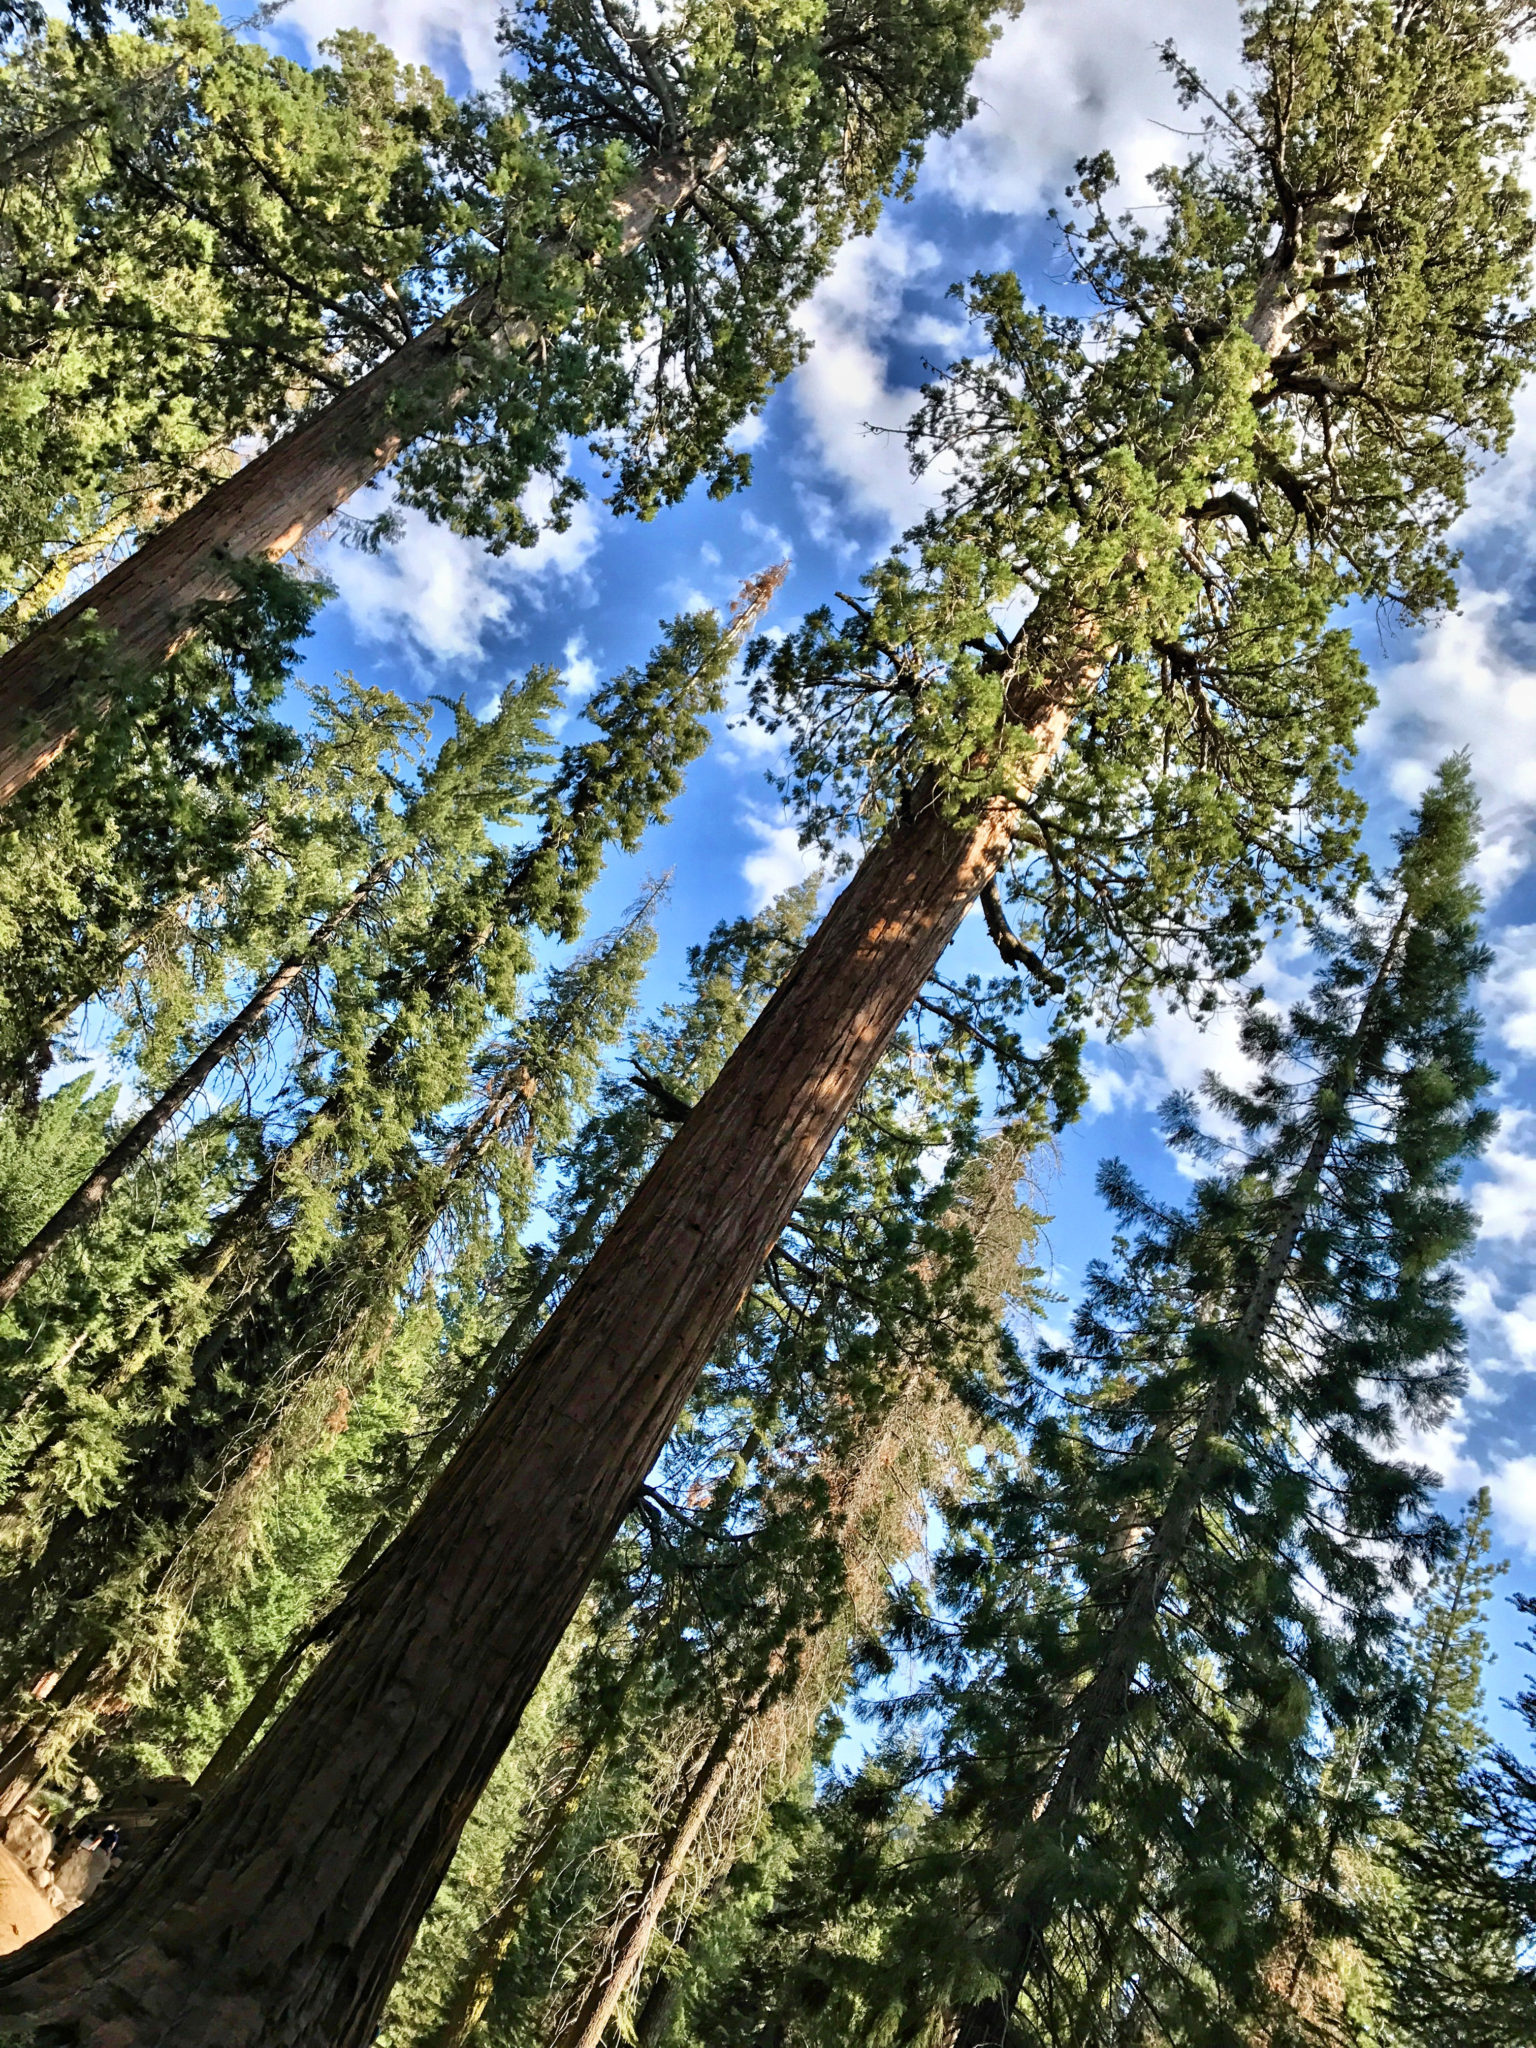 Leaving the Giant Forest and Sequoia National Park